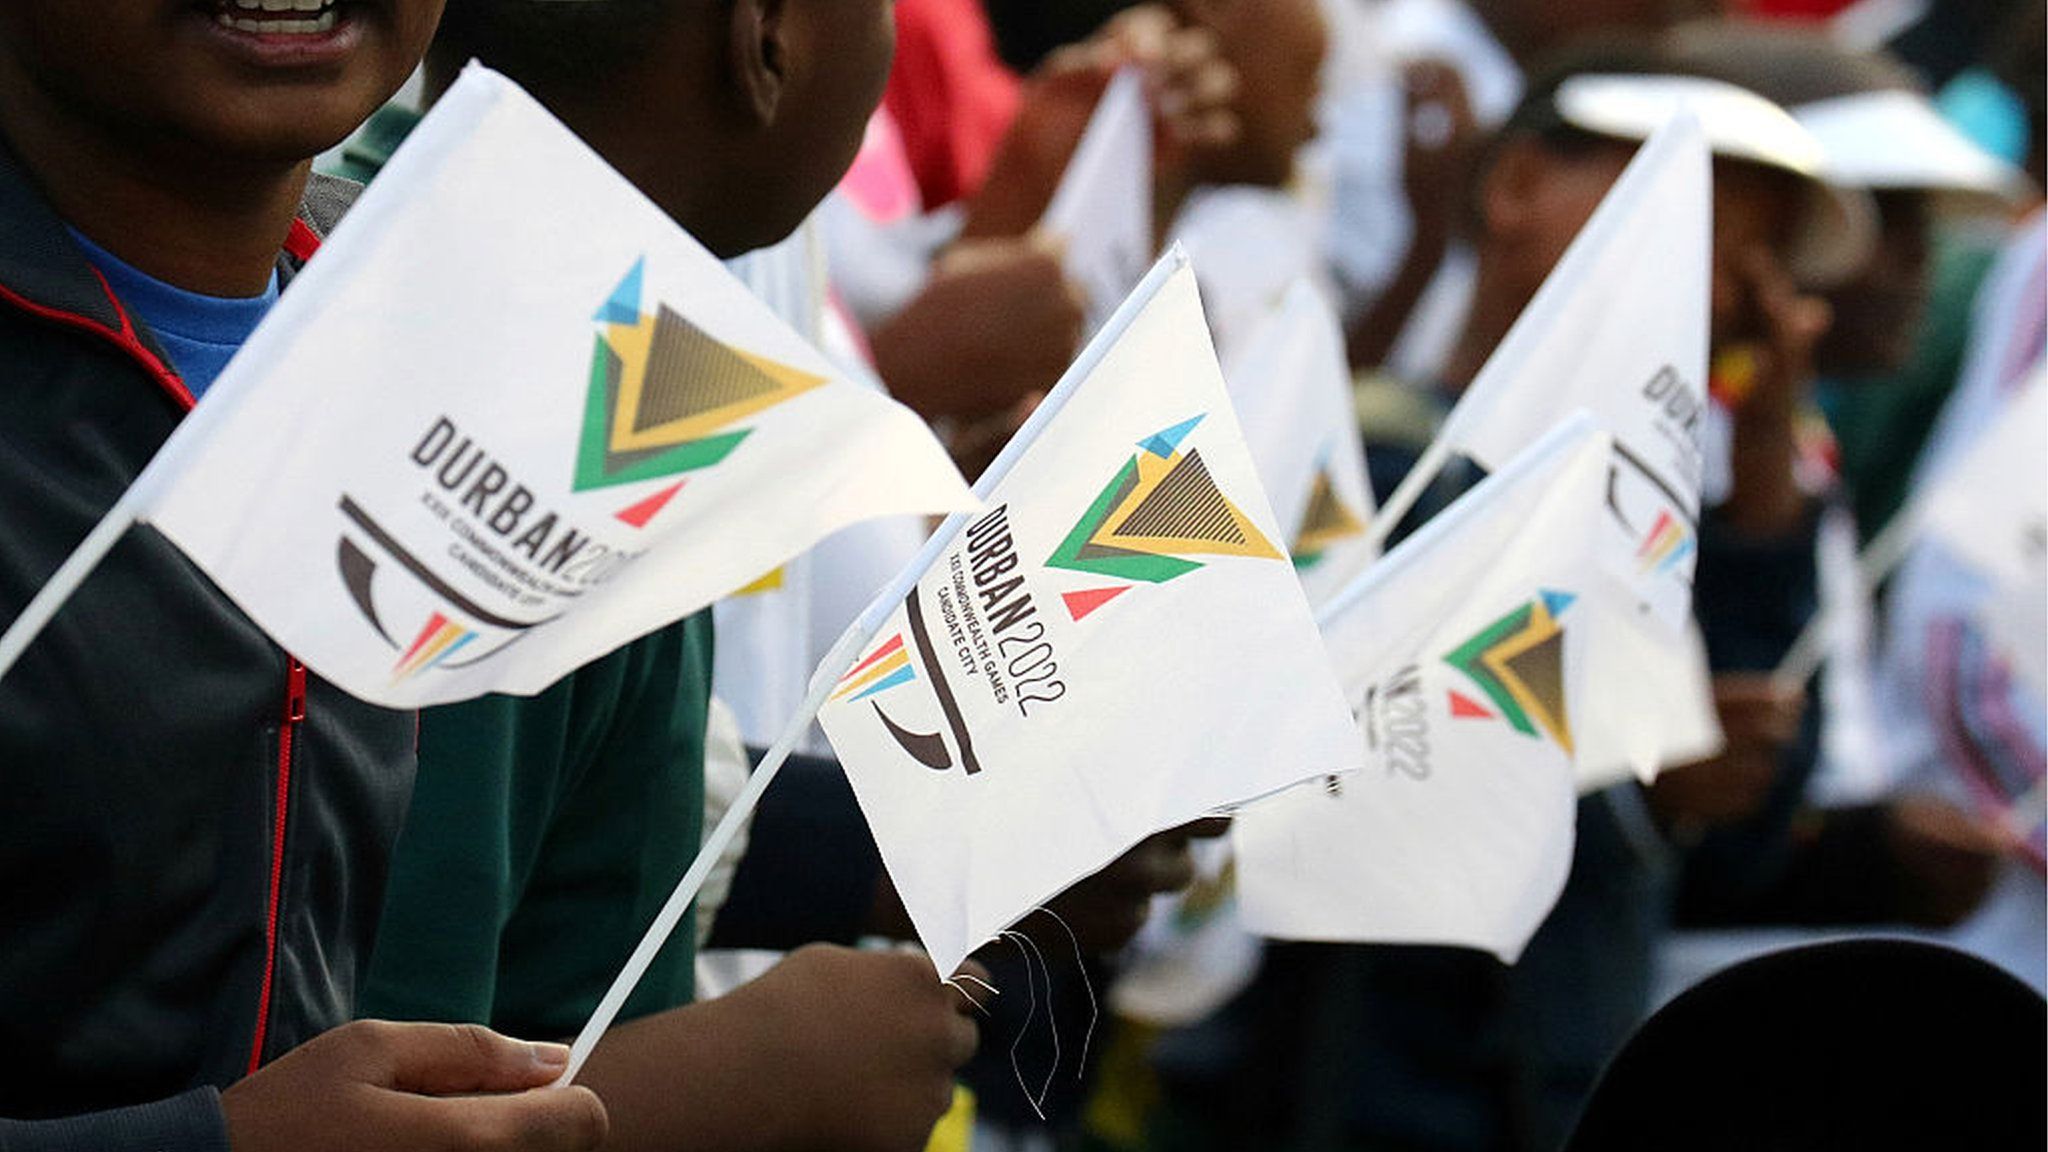 Flags being waved during Durban's bid to host the 2022 Commonwealth Games